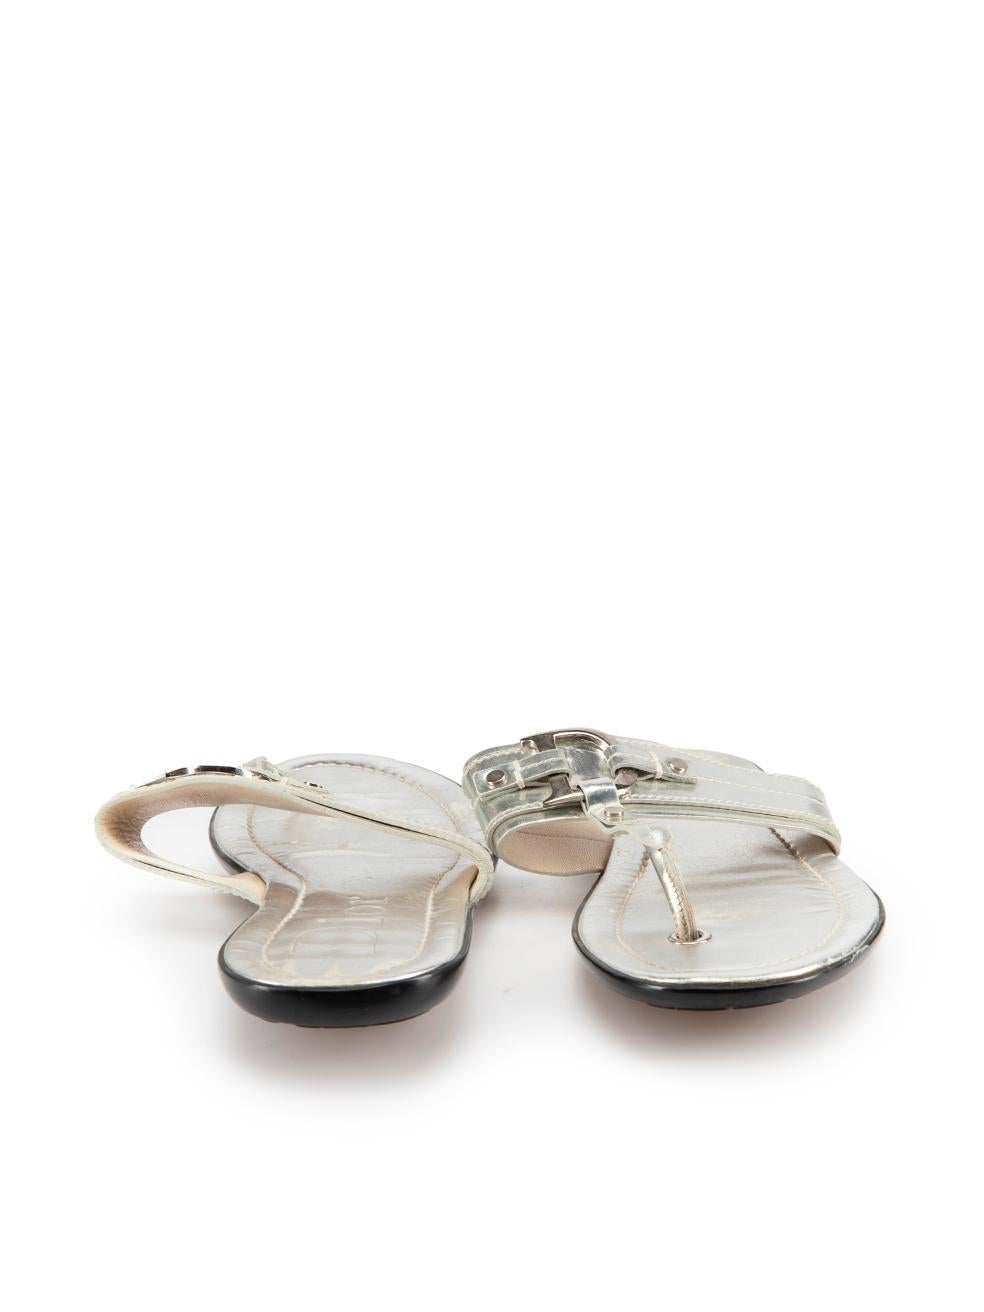 Dior Silver Patent Strap Flat Sandals Size IT 39.5 In Excellent Condition For Sale In London, GB